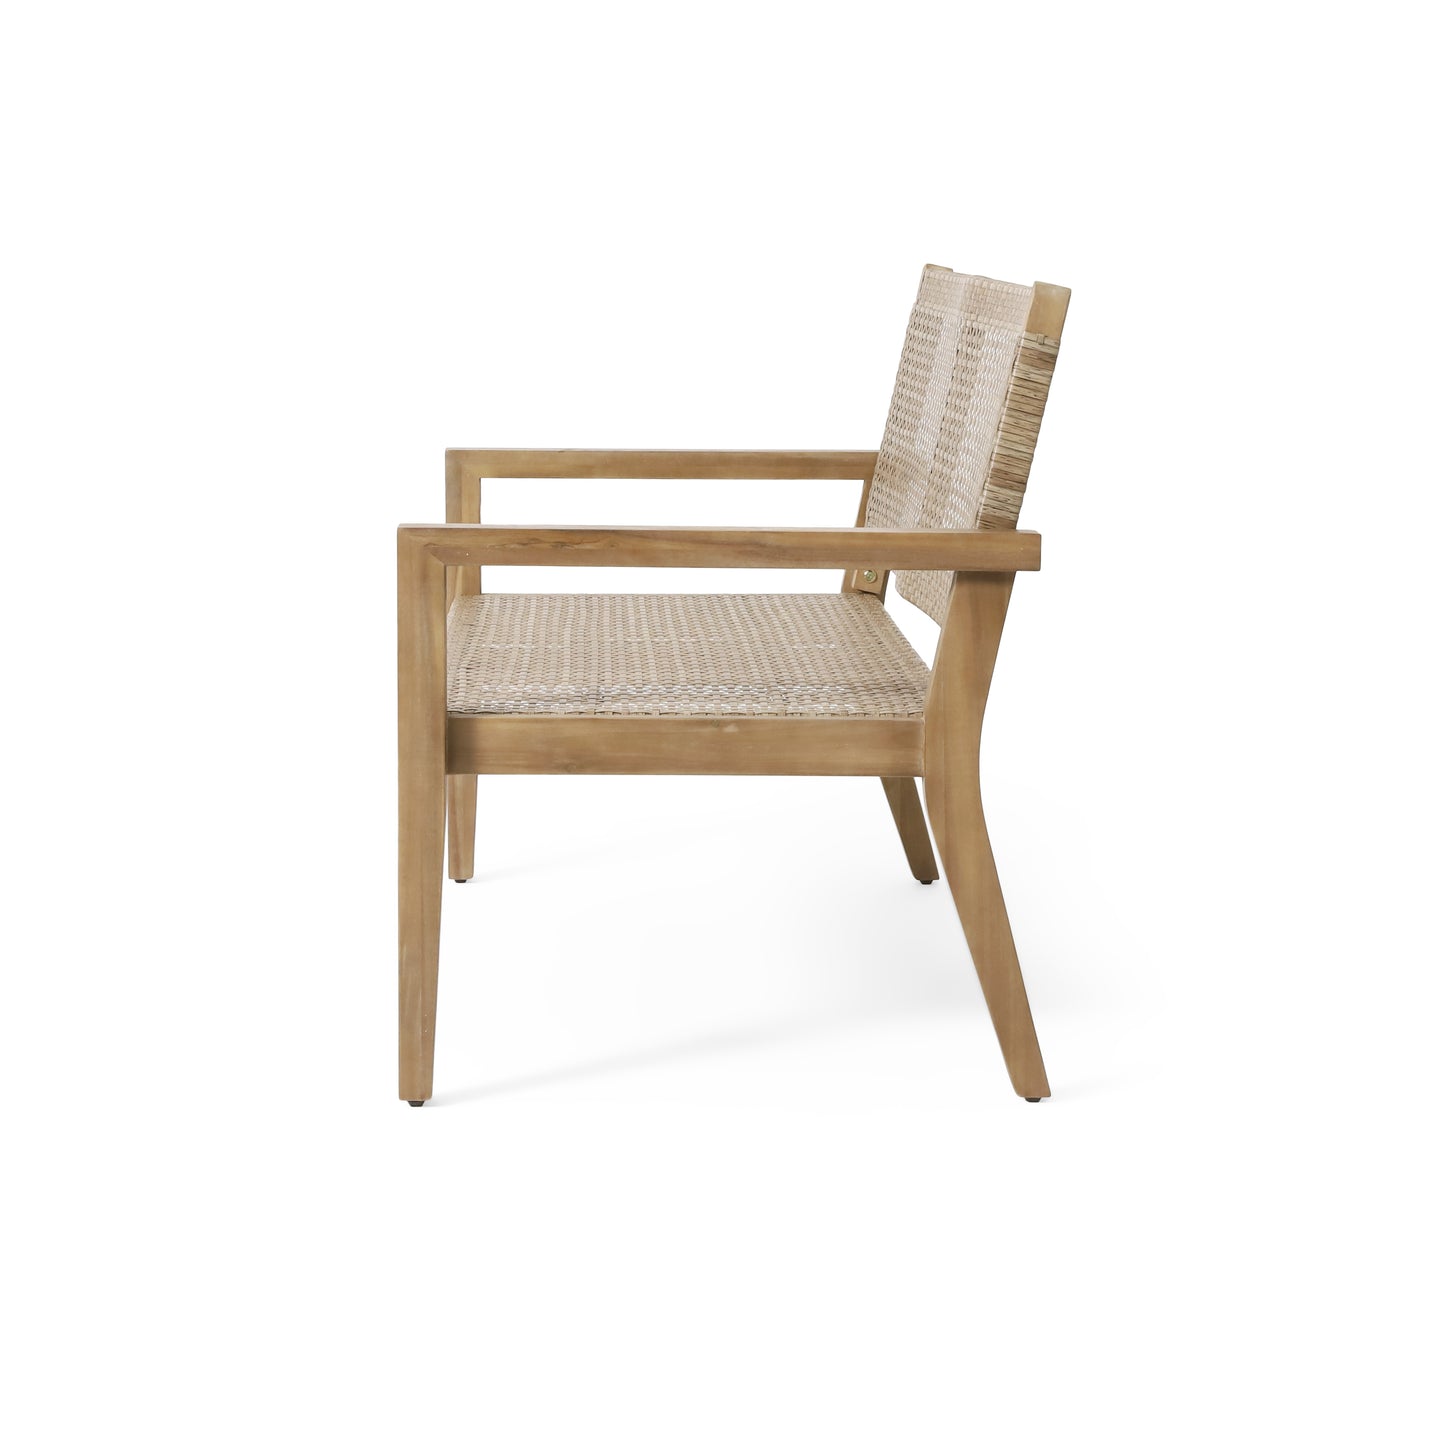 Elmcrest Outdoor Wicker and Acacia Wood Loveseat, Light Multibrown and Light Brown